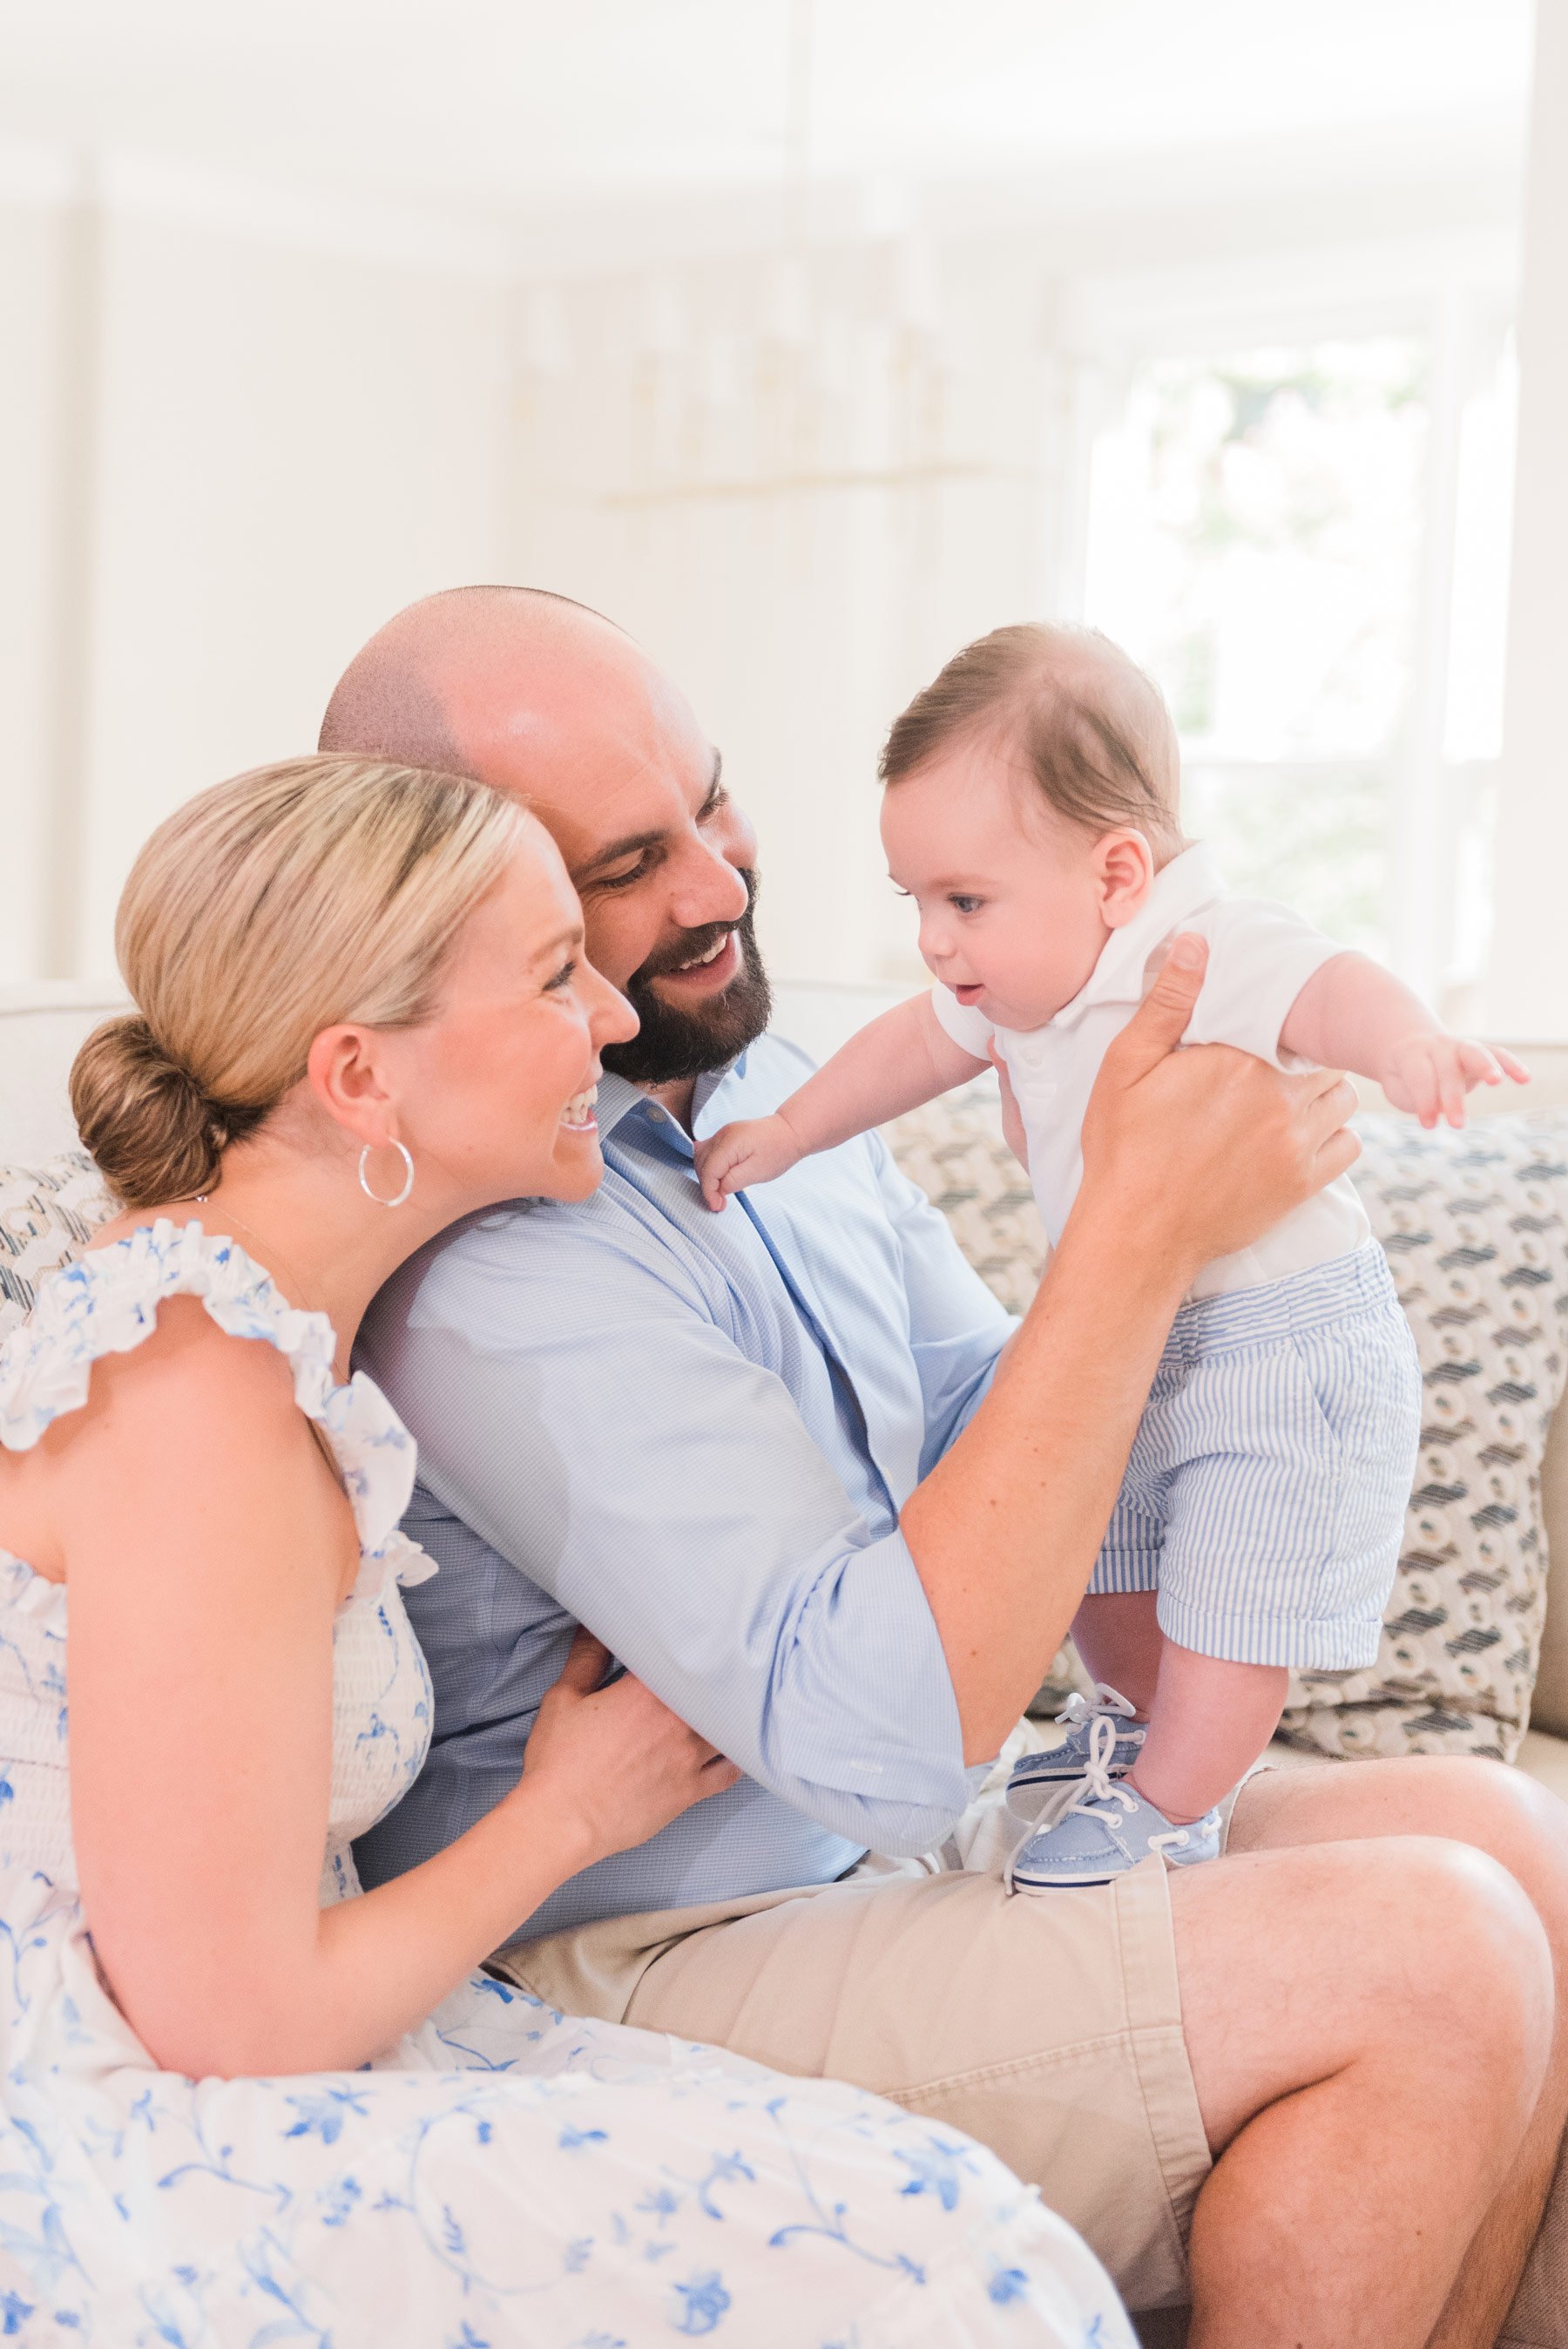  With an in-home session by Jacquie Erickson photography, you not only get a snapshot of each member of your family but also of your family home. #inhomeportraitsessions #familyphotos #portraitphotography #atlantaphotographer #jacquieerickson #fayett